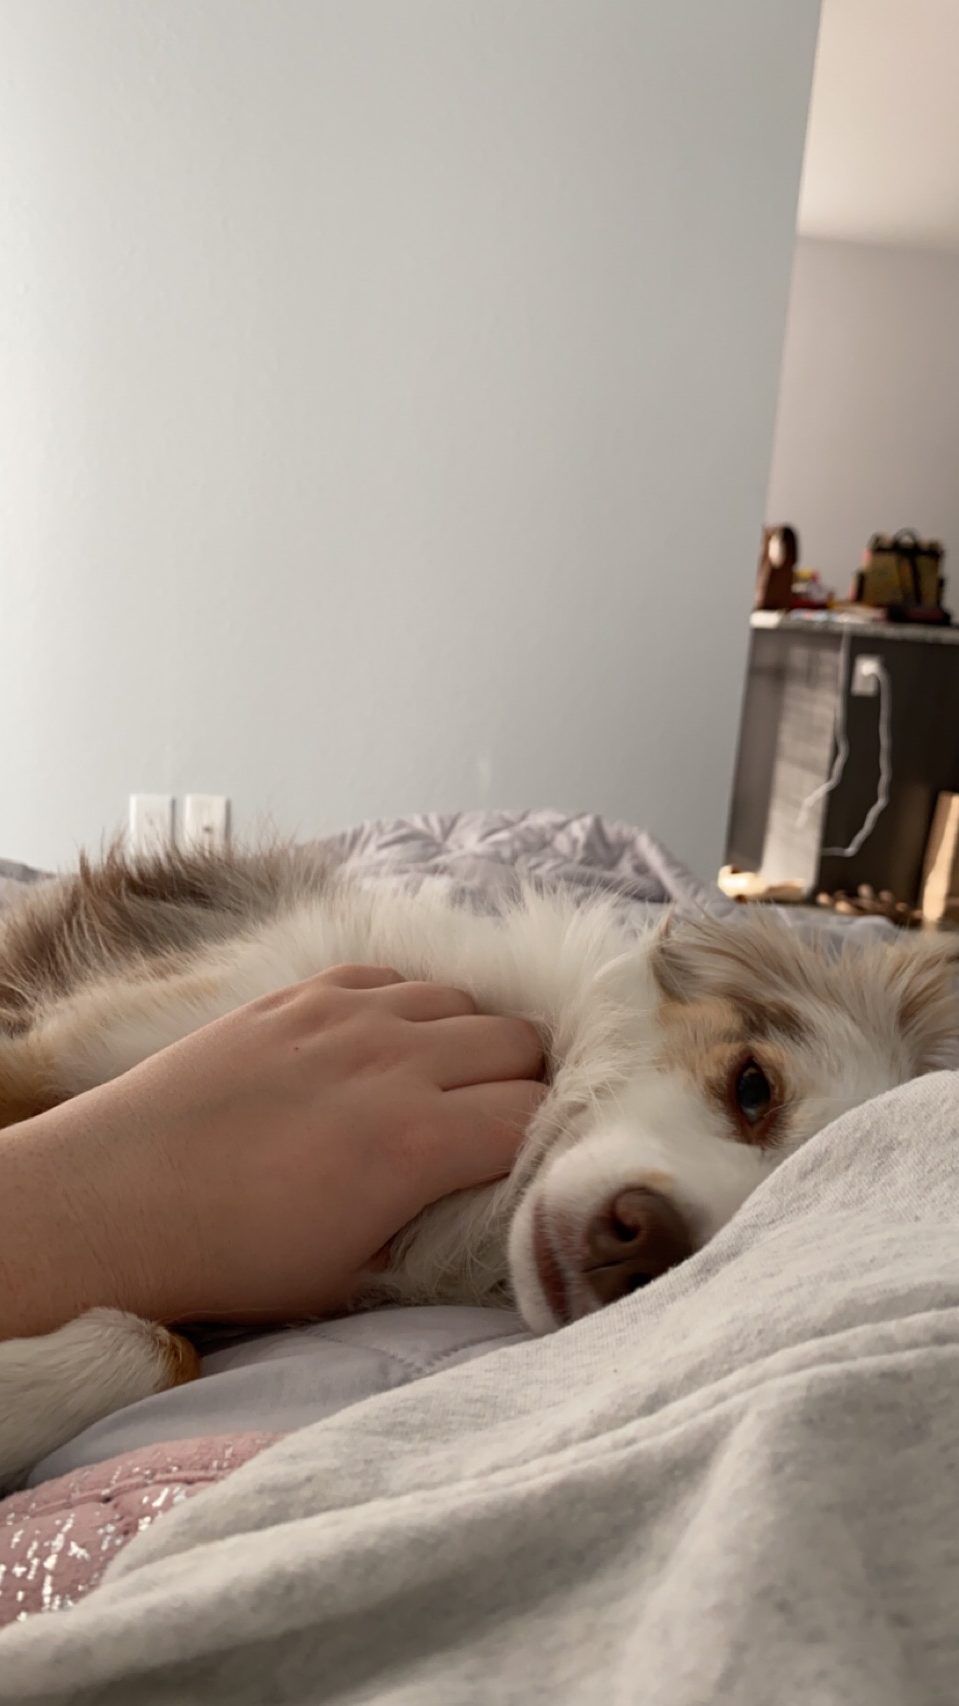 Cell phone photo of a hand petting a sleepy dog in bed.